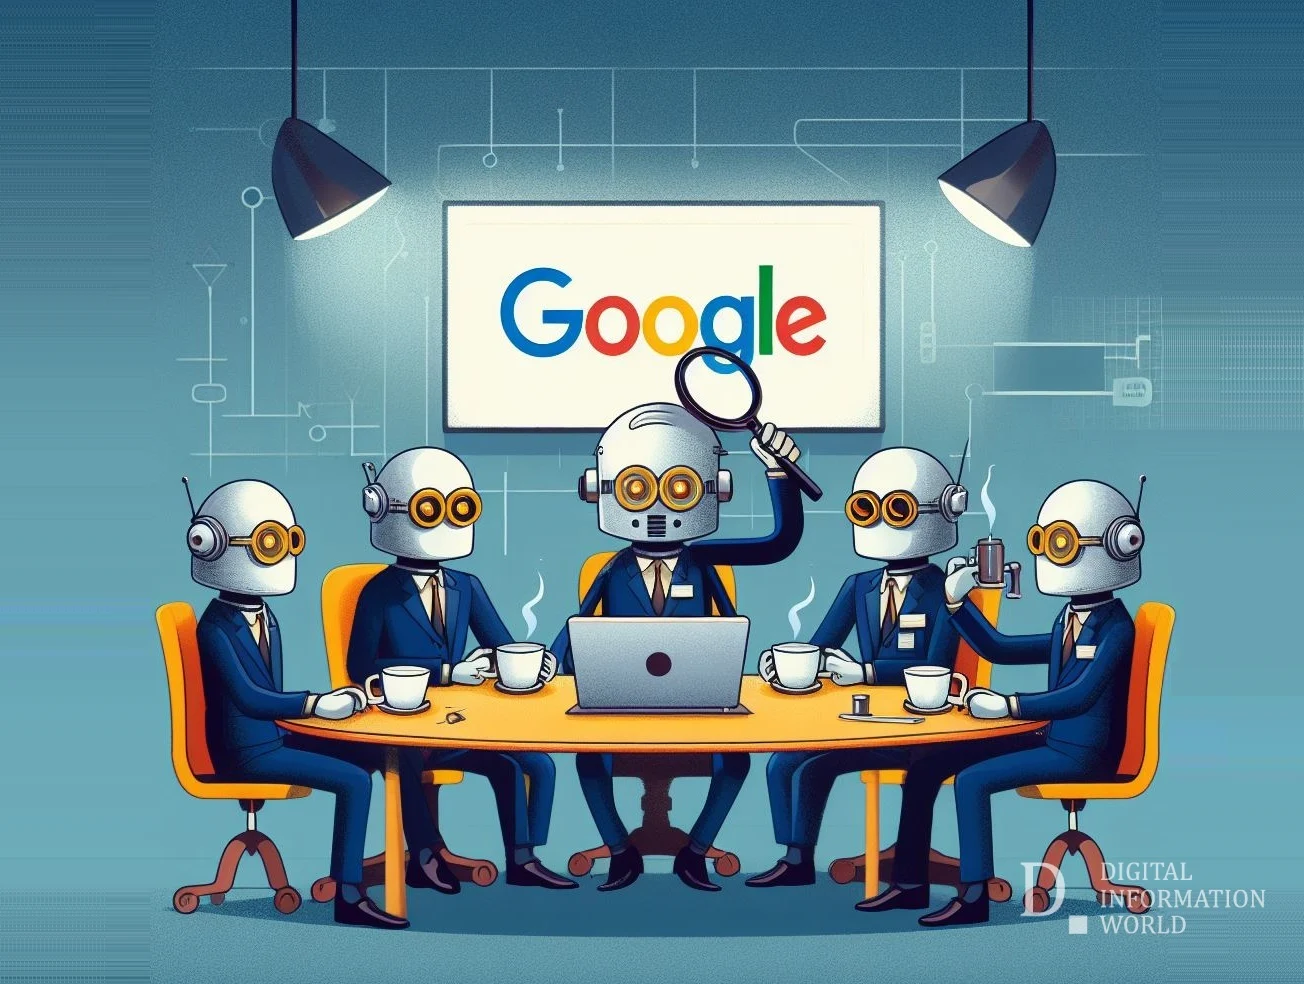 Google's search team discusses AI as a creative assistant, debunking fears of replacing human ingenuity.